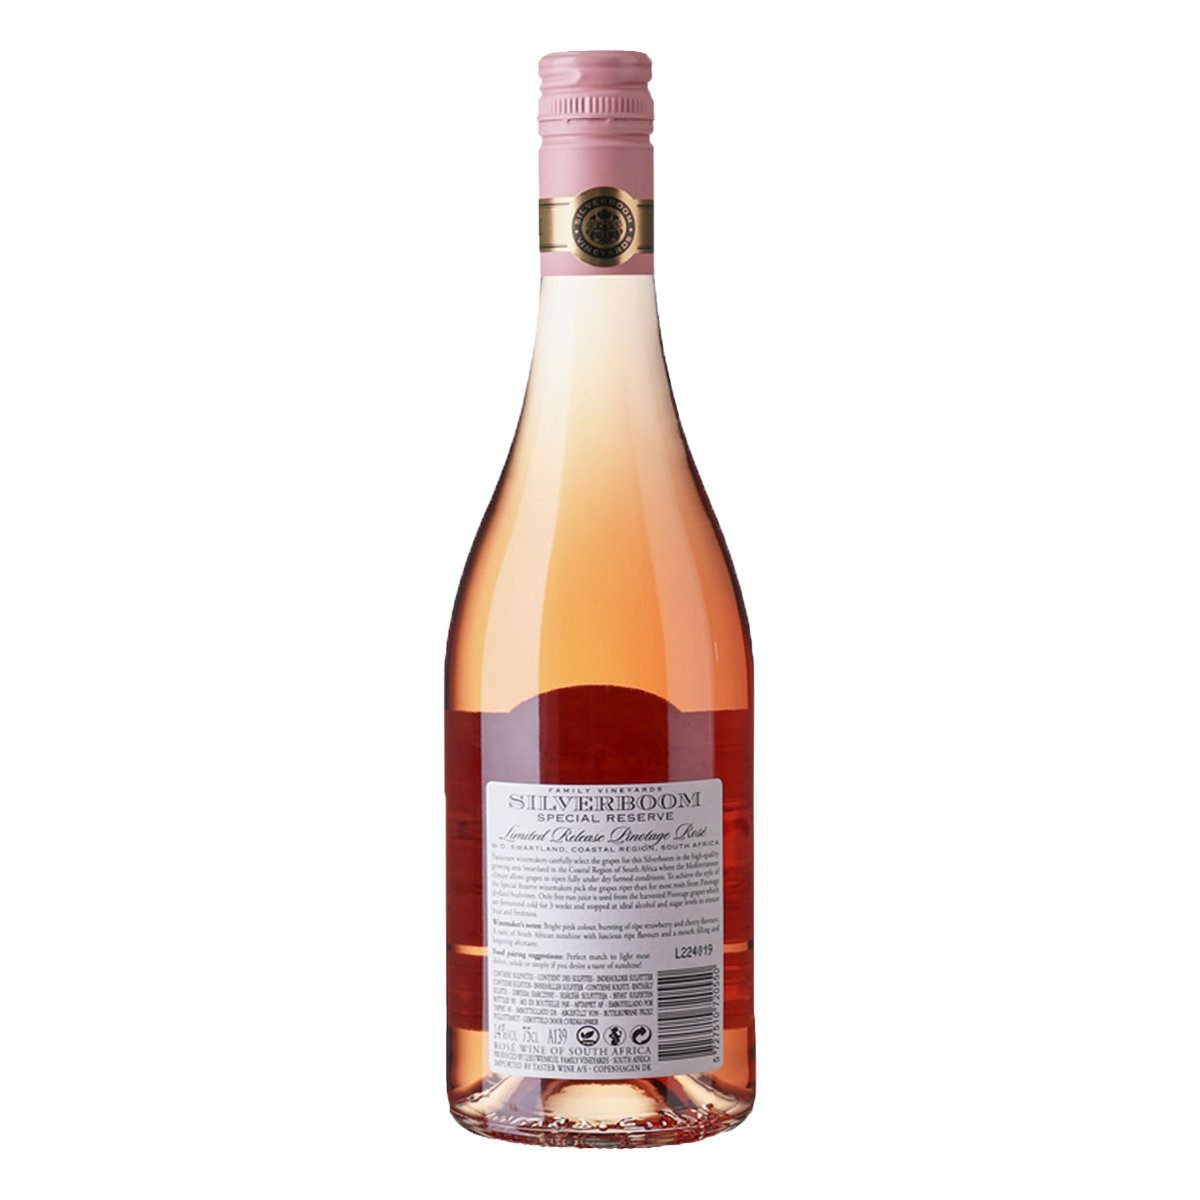 Silverboom Special Reserve Pinotage Rose Swartland 2020 - Bloom Concept